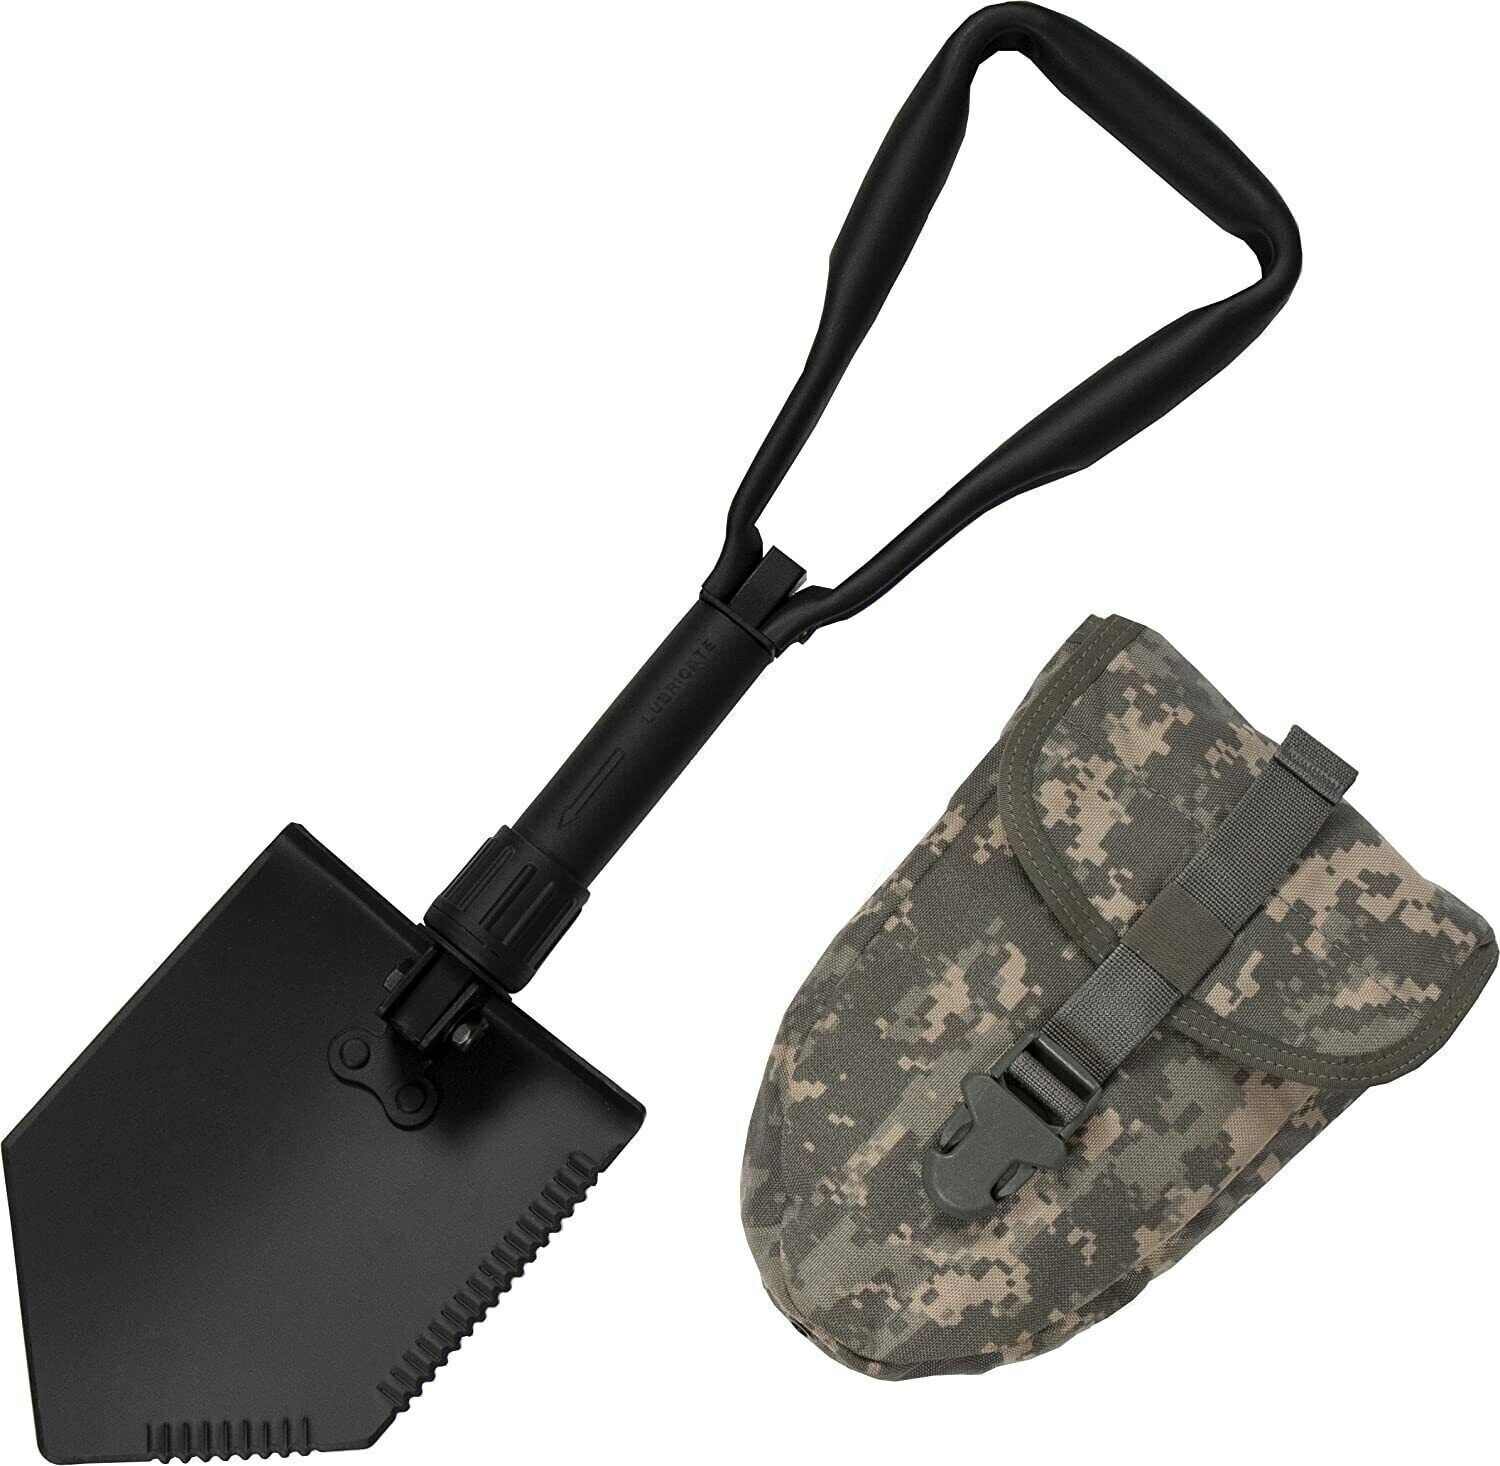 USGI Military AMES or LHB E TOOL ENTRENCHING TOOL SHOVEL w ACU COVER CARRIER VGC